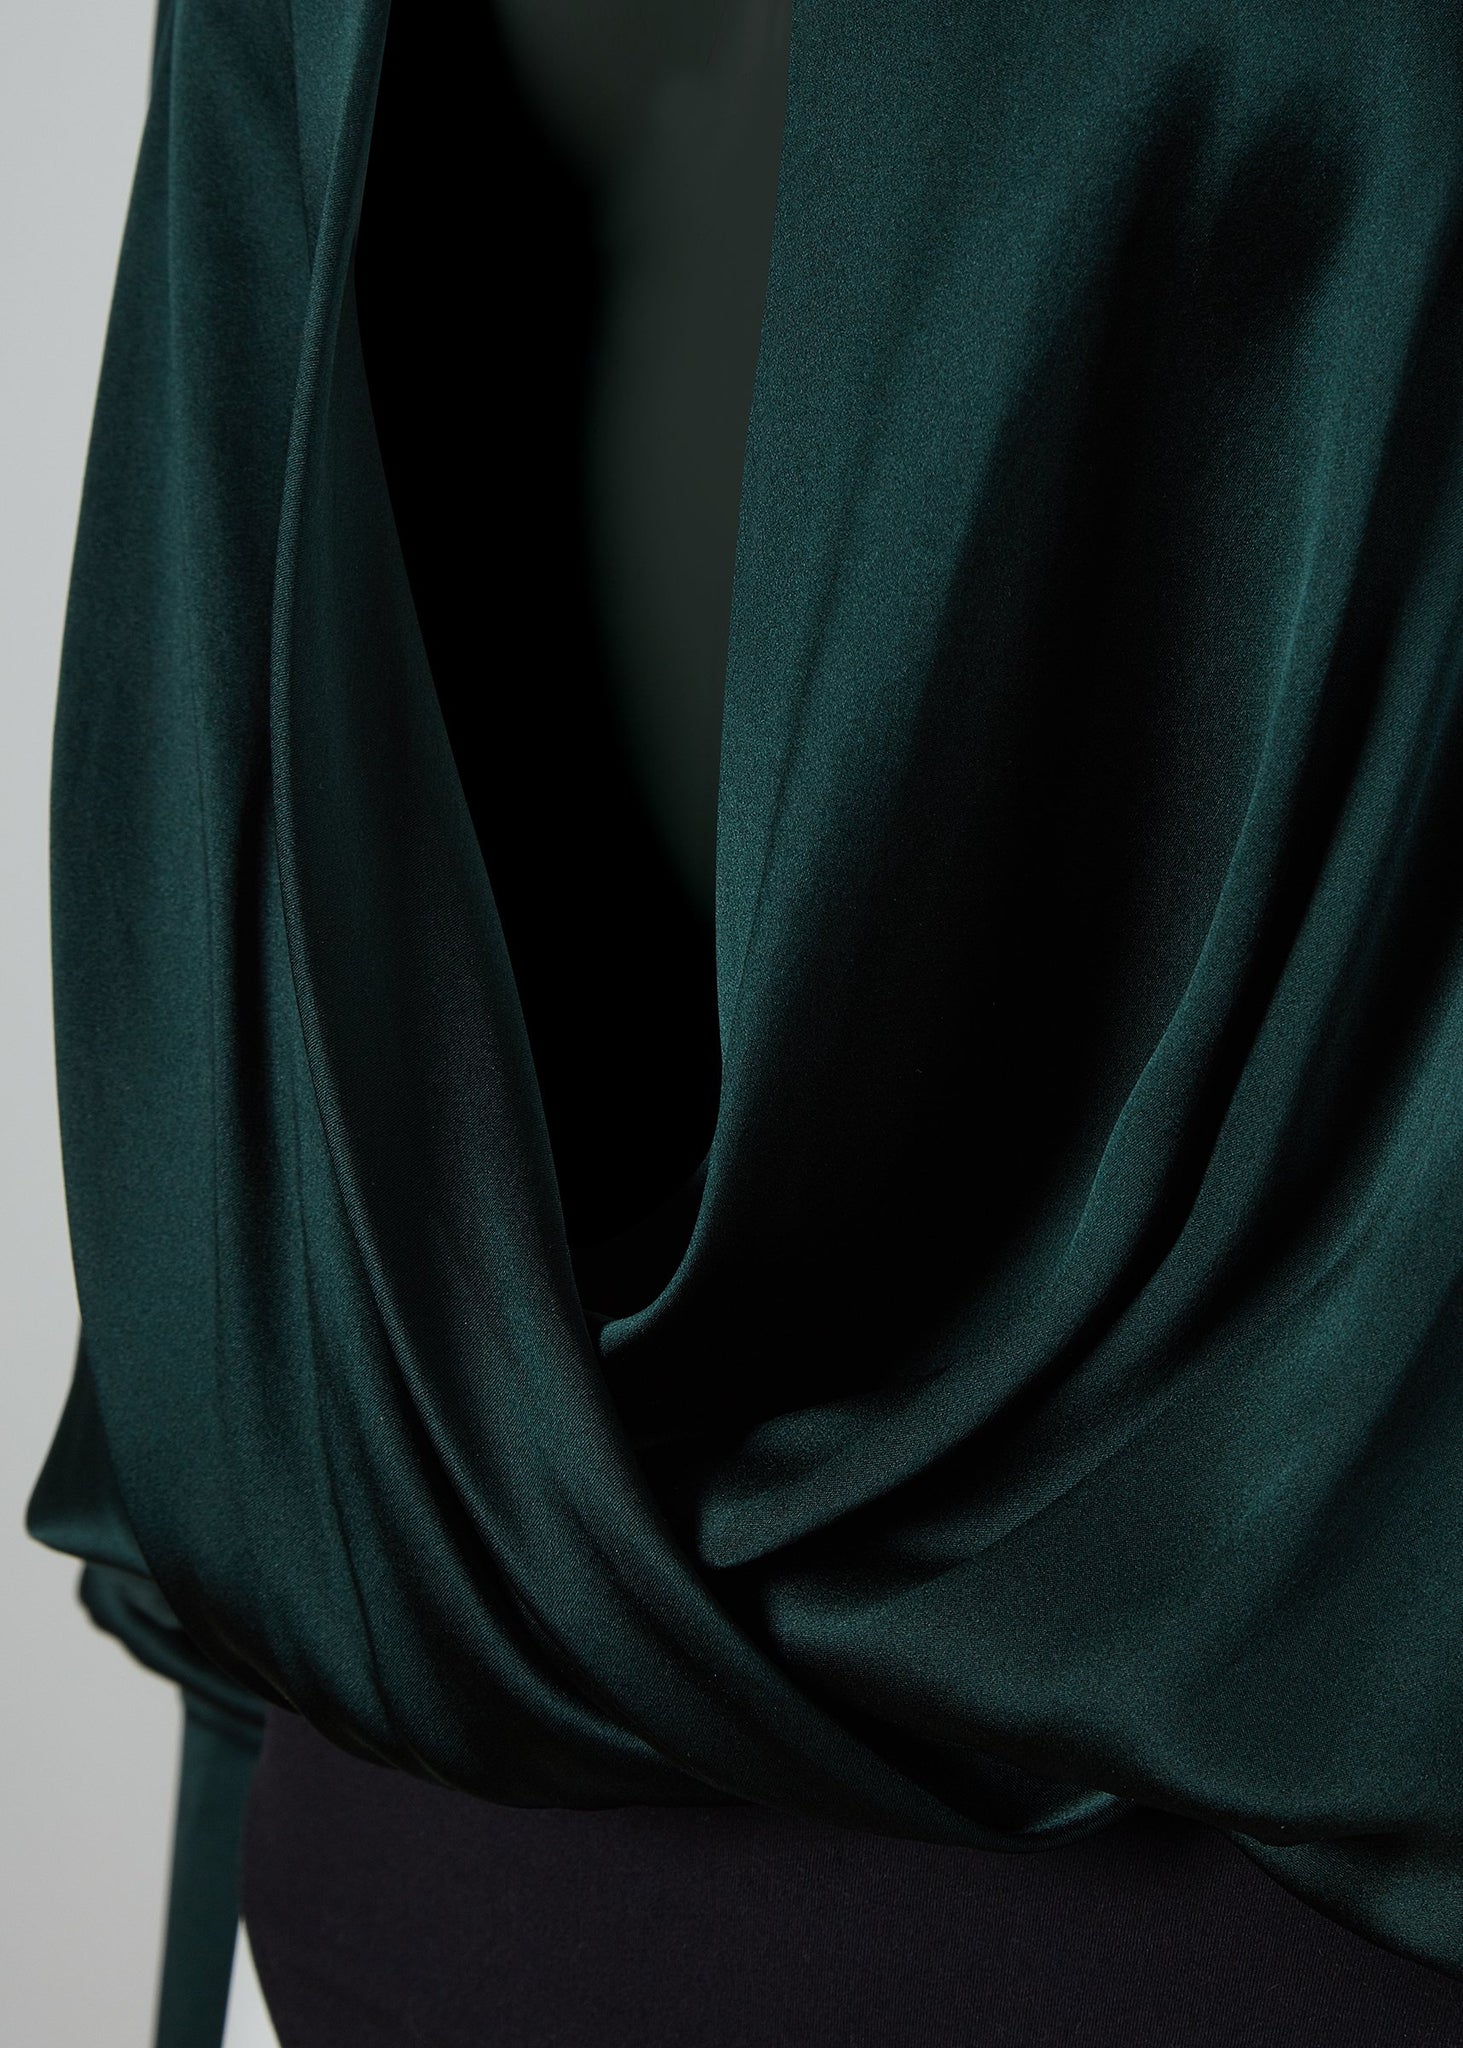 wrap detail on womens long sleeve silk dark green wrap front bodysuit with gold buttons